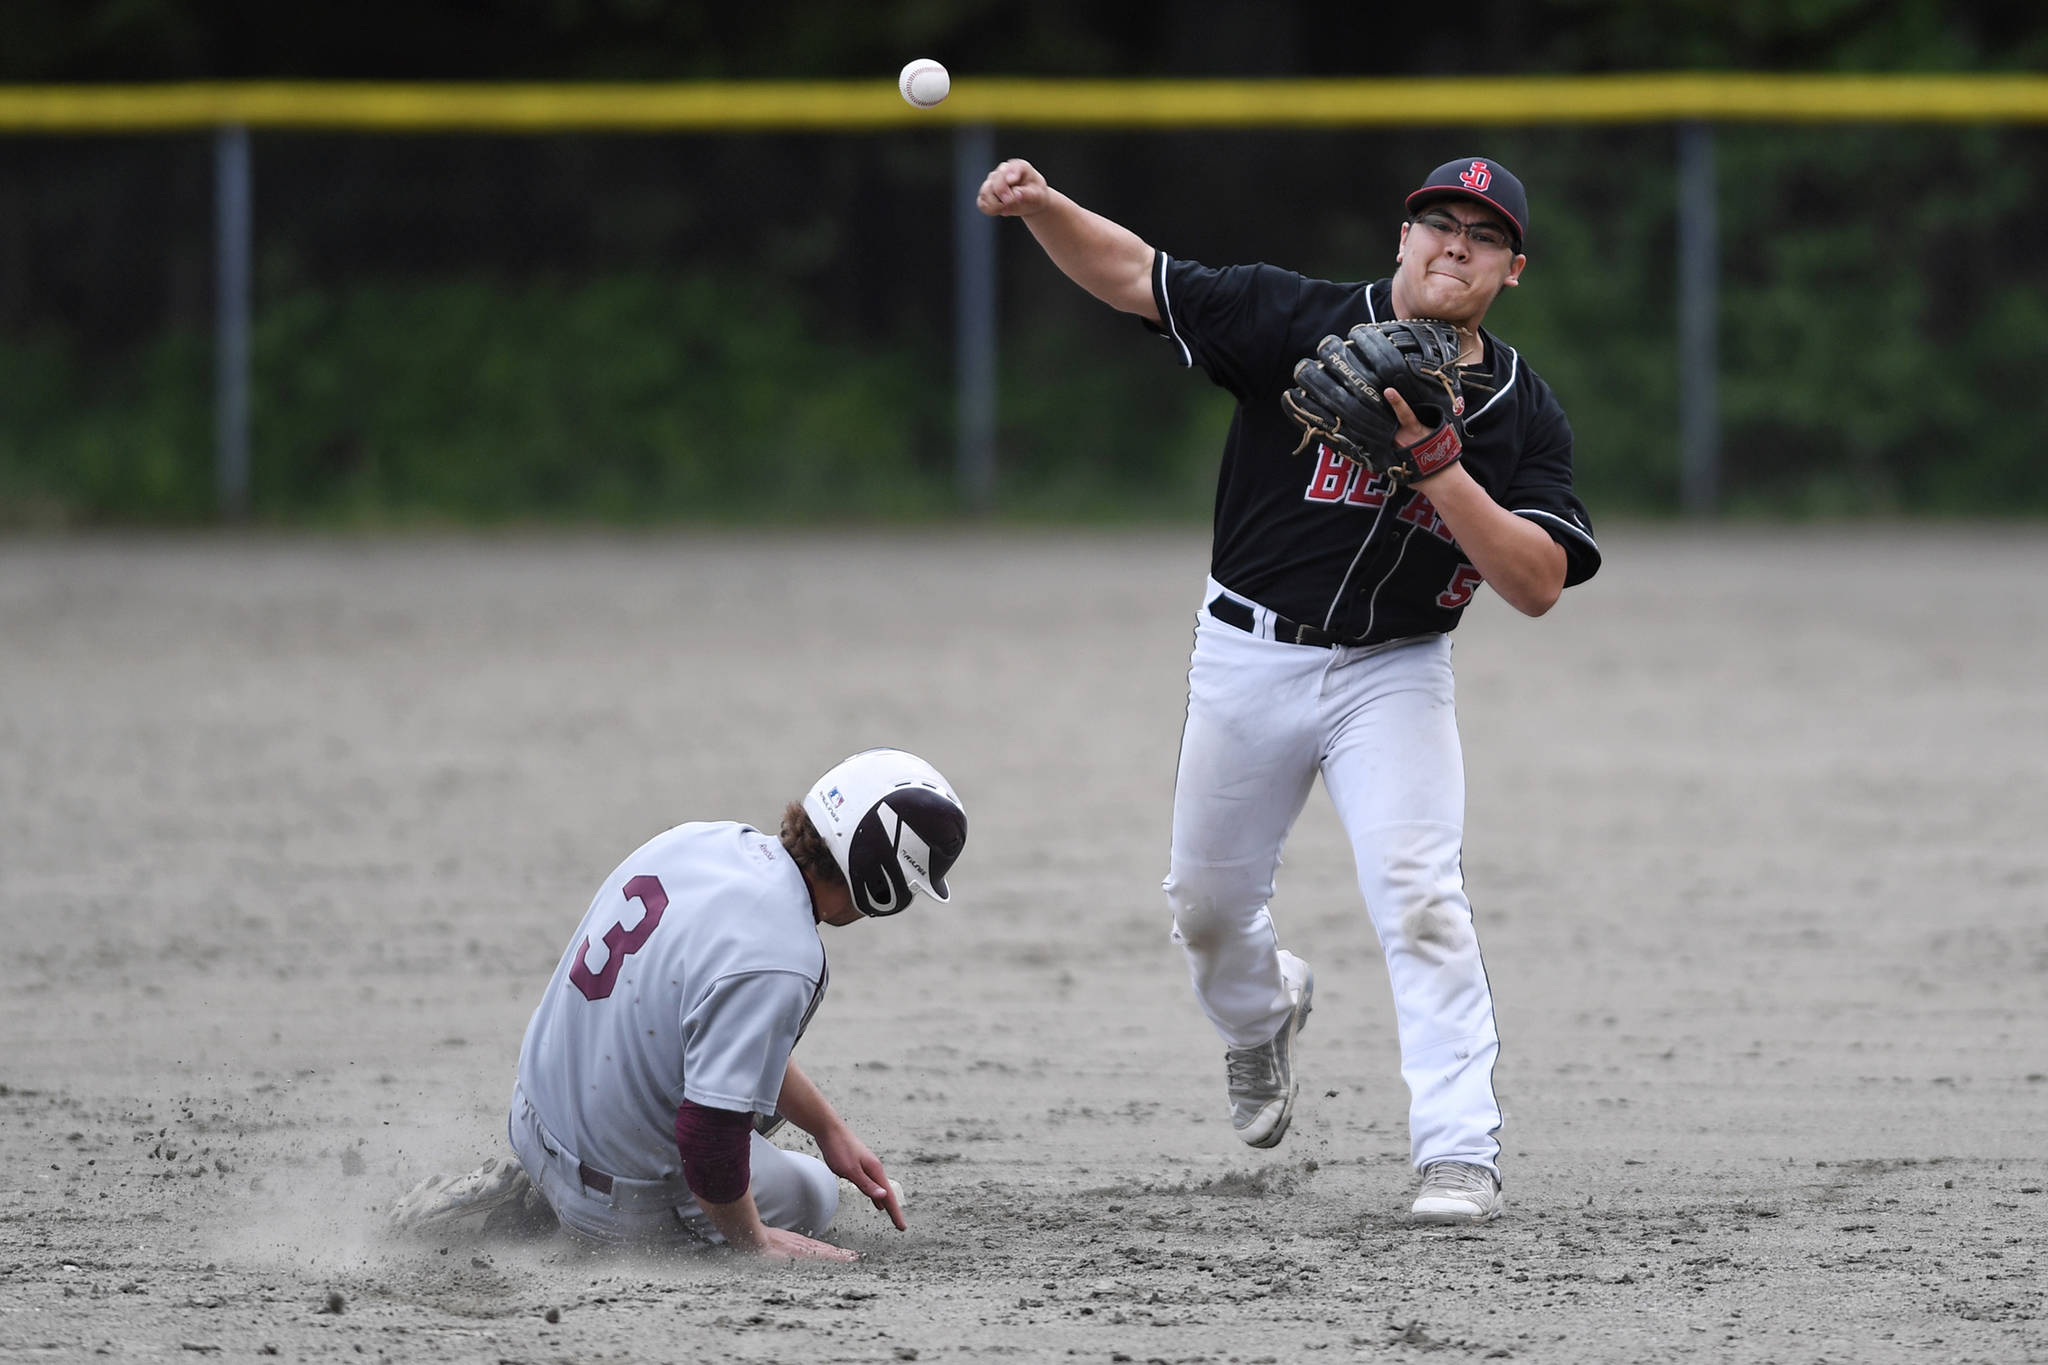 Juneau-Douglas’ Kona Ogoy, right, forces Ketchikan’s Brock King out at second as he completes the double play to first during the Region V Baseball Championship at Adair-Kennedy Memorial Park on Friday, May 24, 2019. (Michael Penn | Juneau Empire)